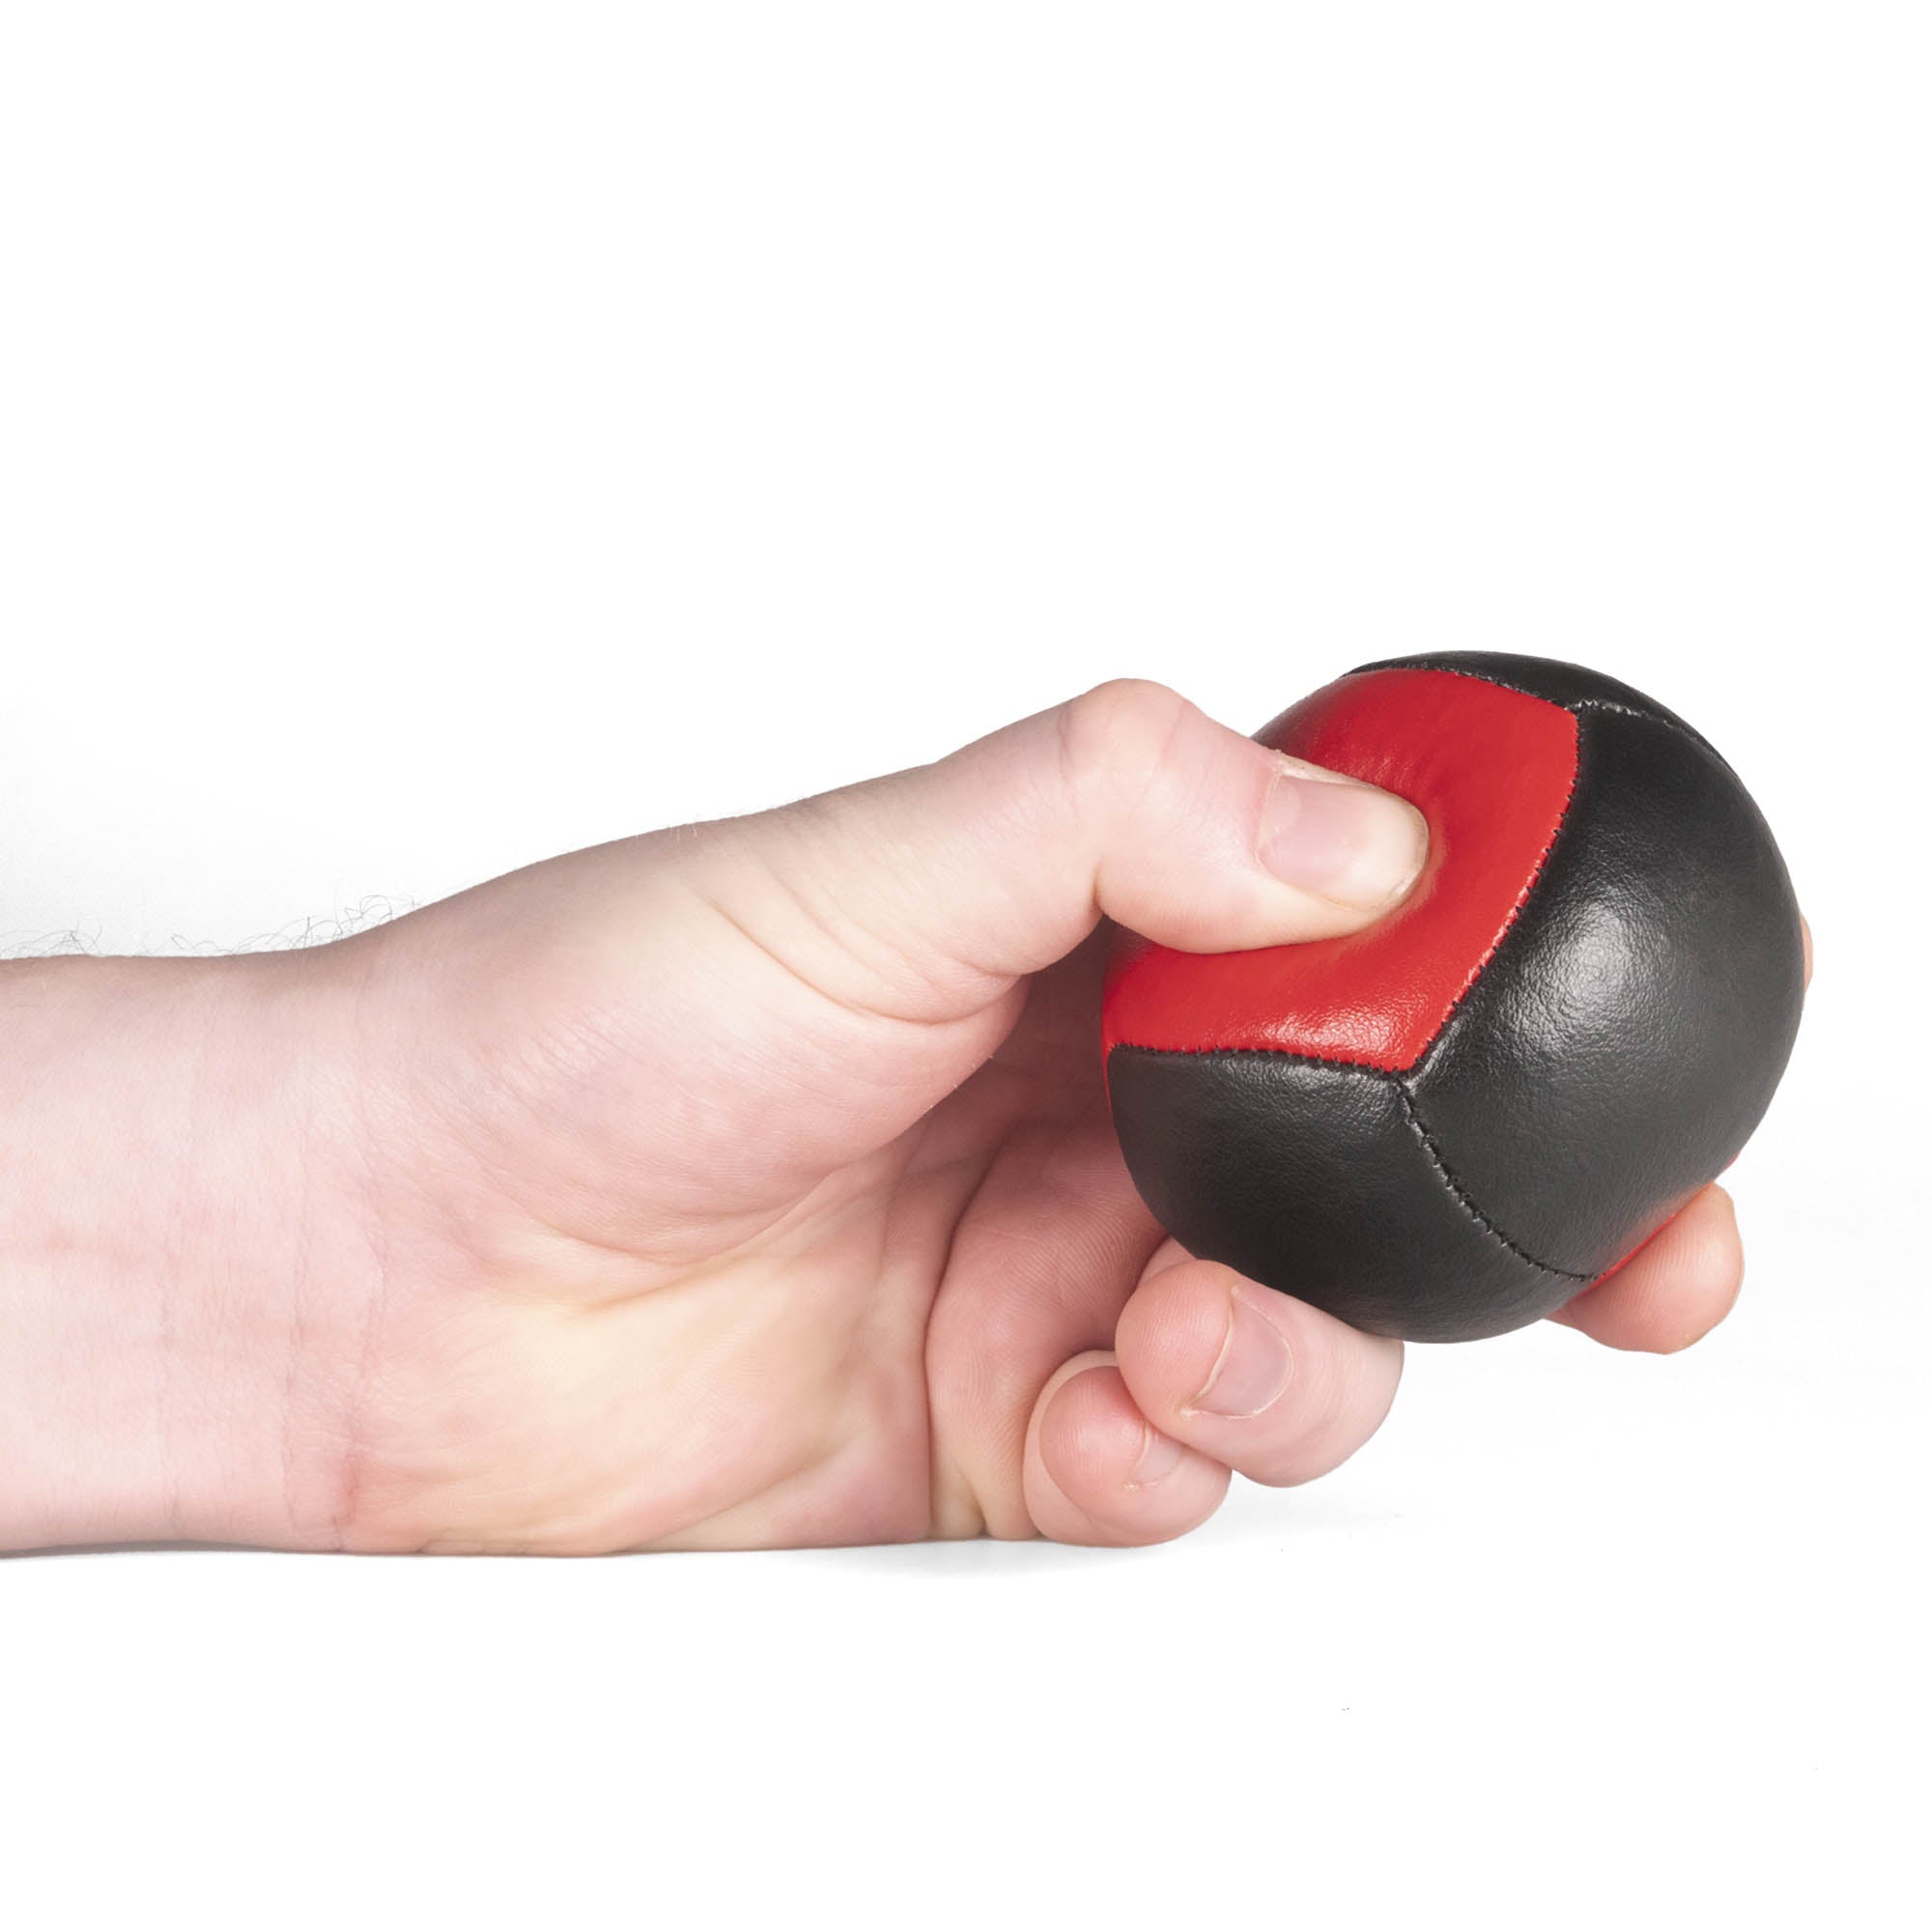 Firetoys red/black 110g thud juggling ball being squeezed